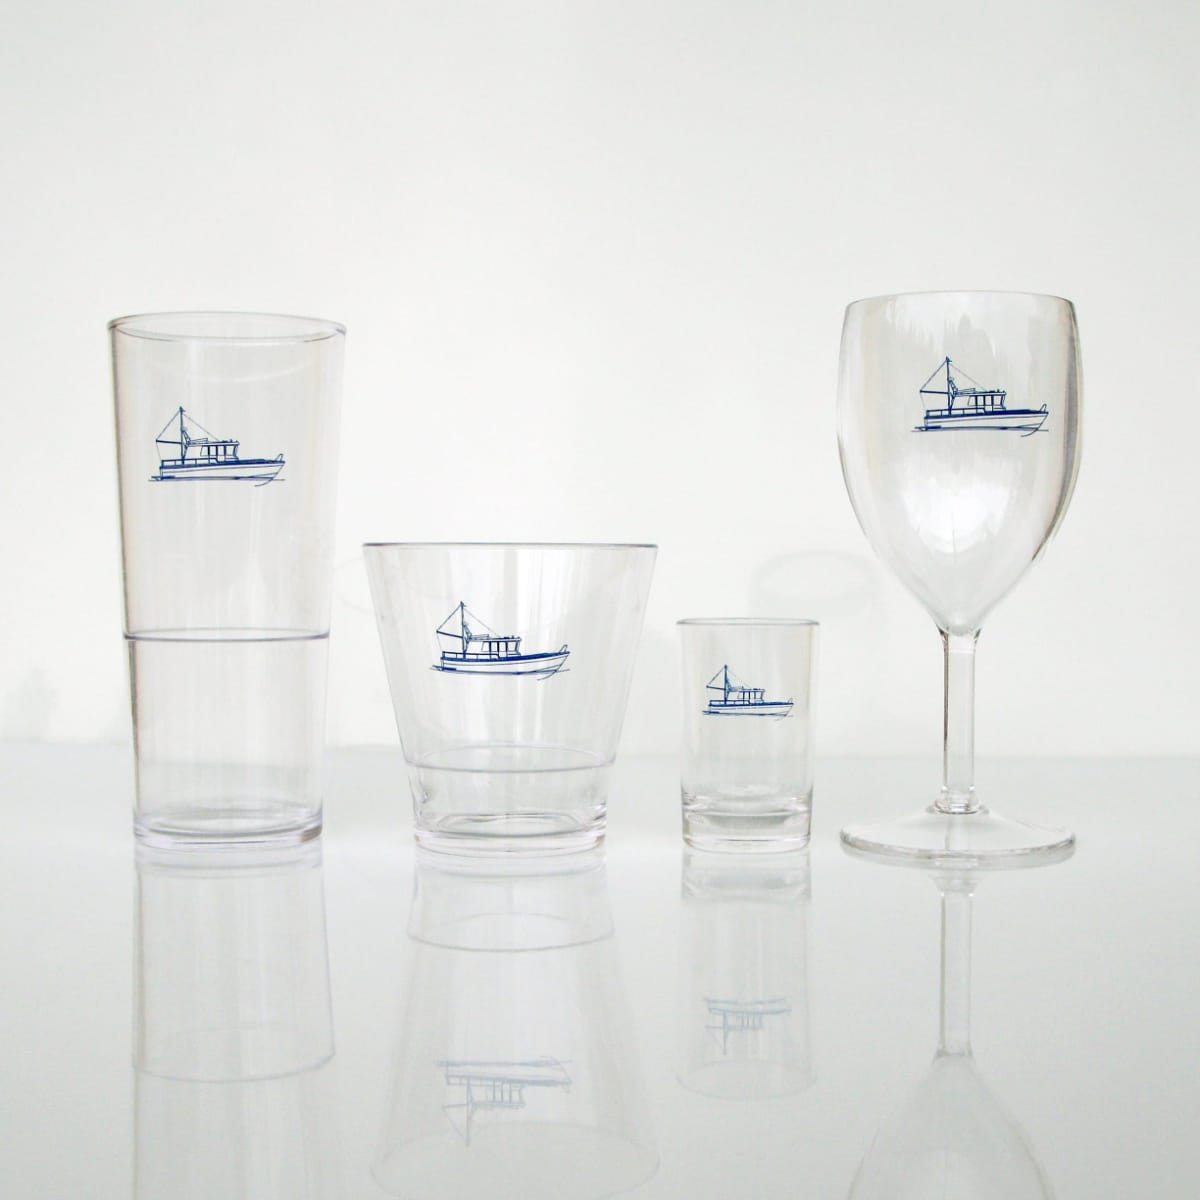 Four types of glasses in sets for either four persons (16 glasses in total) or six persons (24 glasses in total)